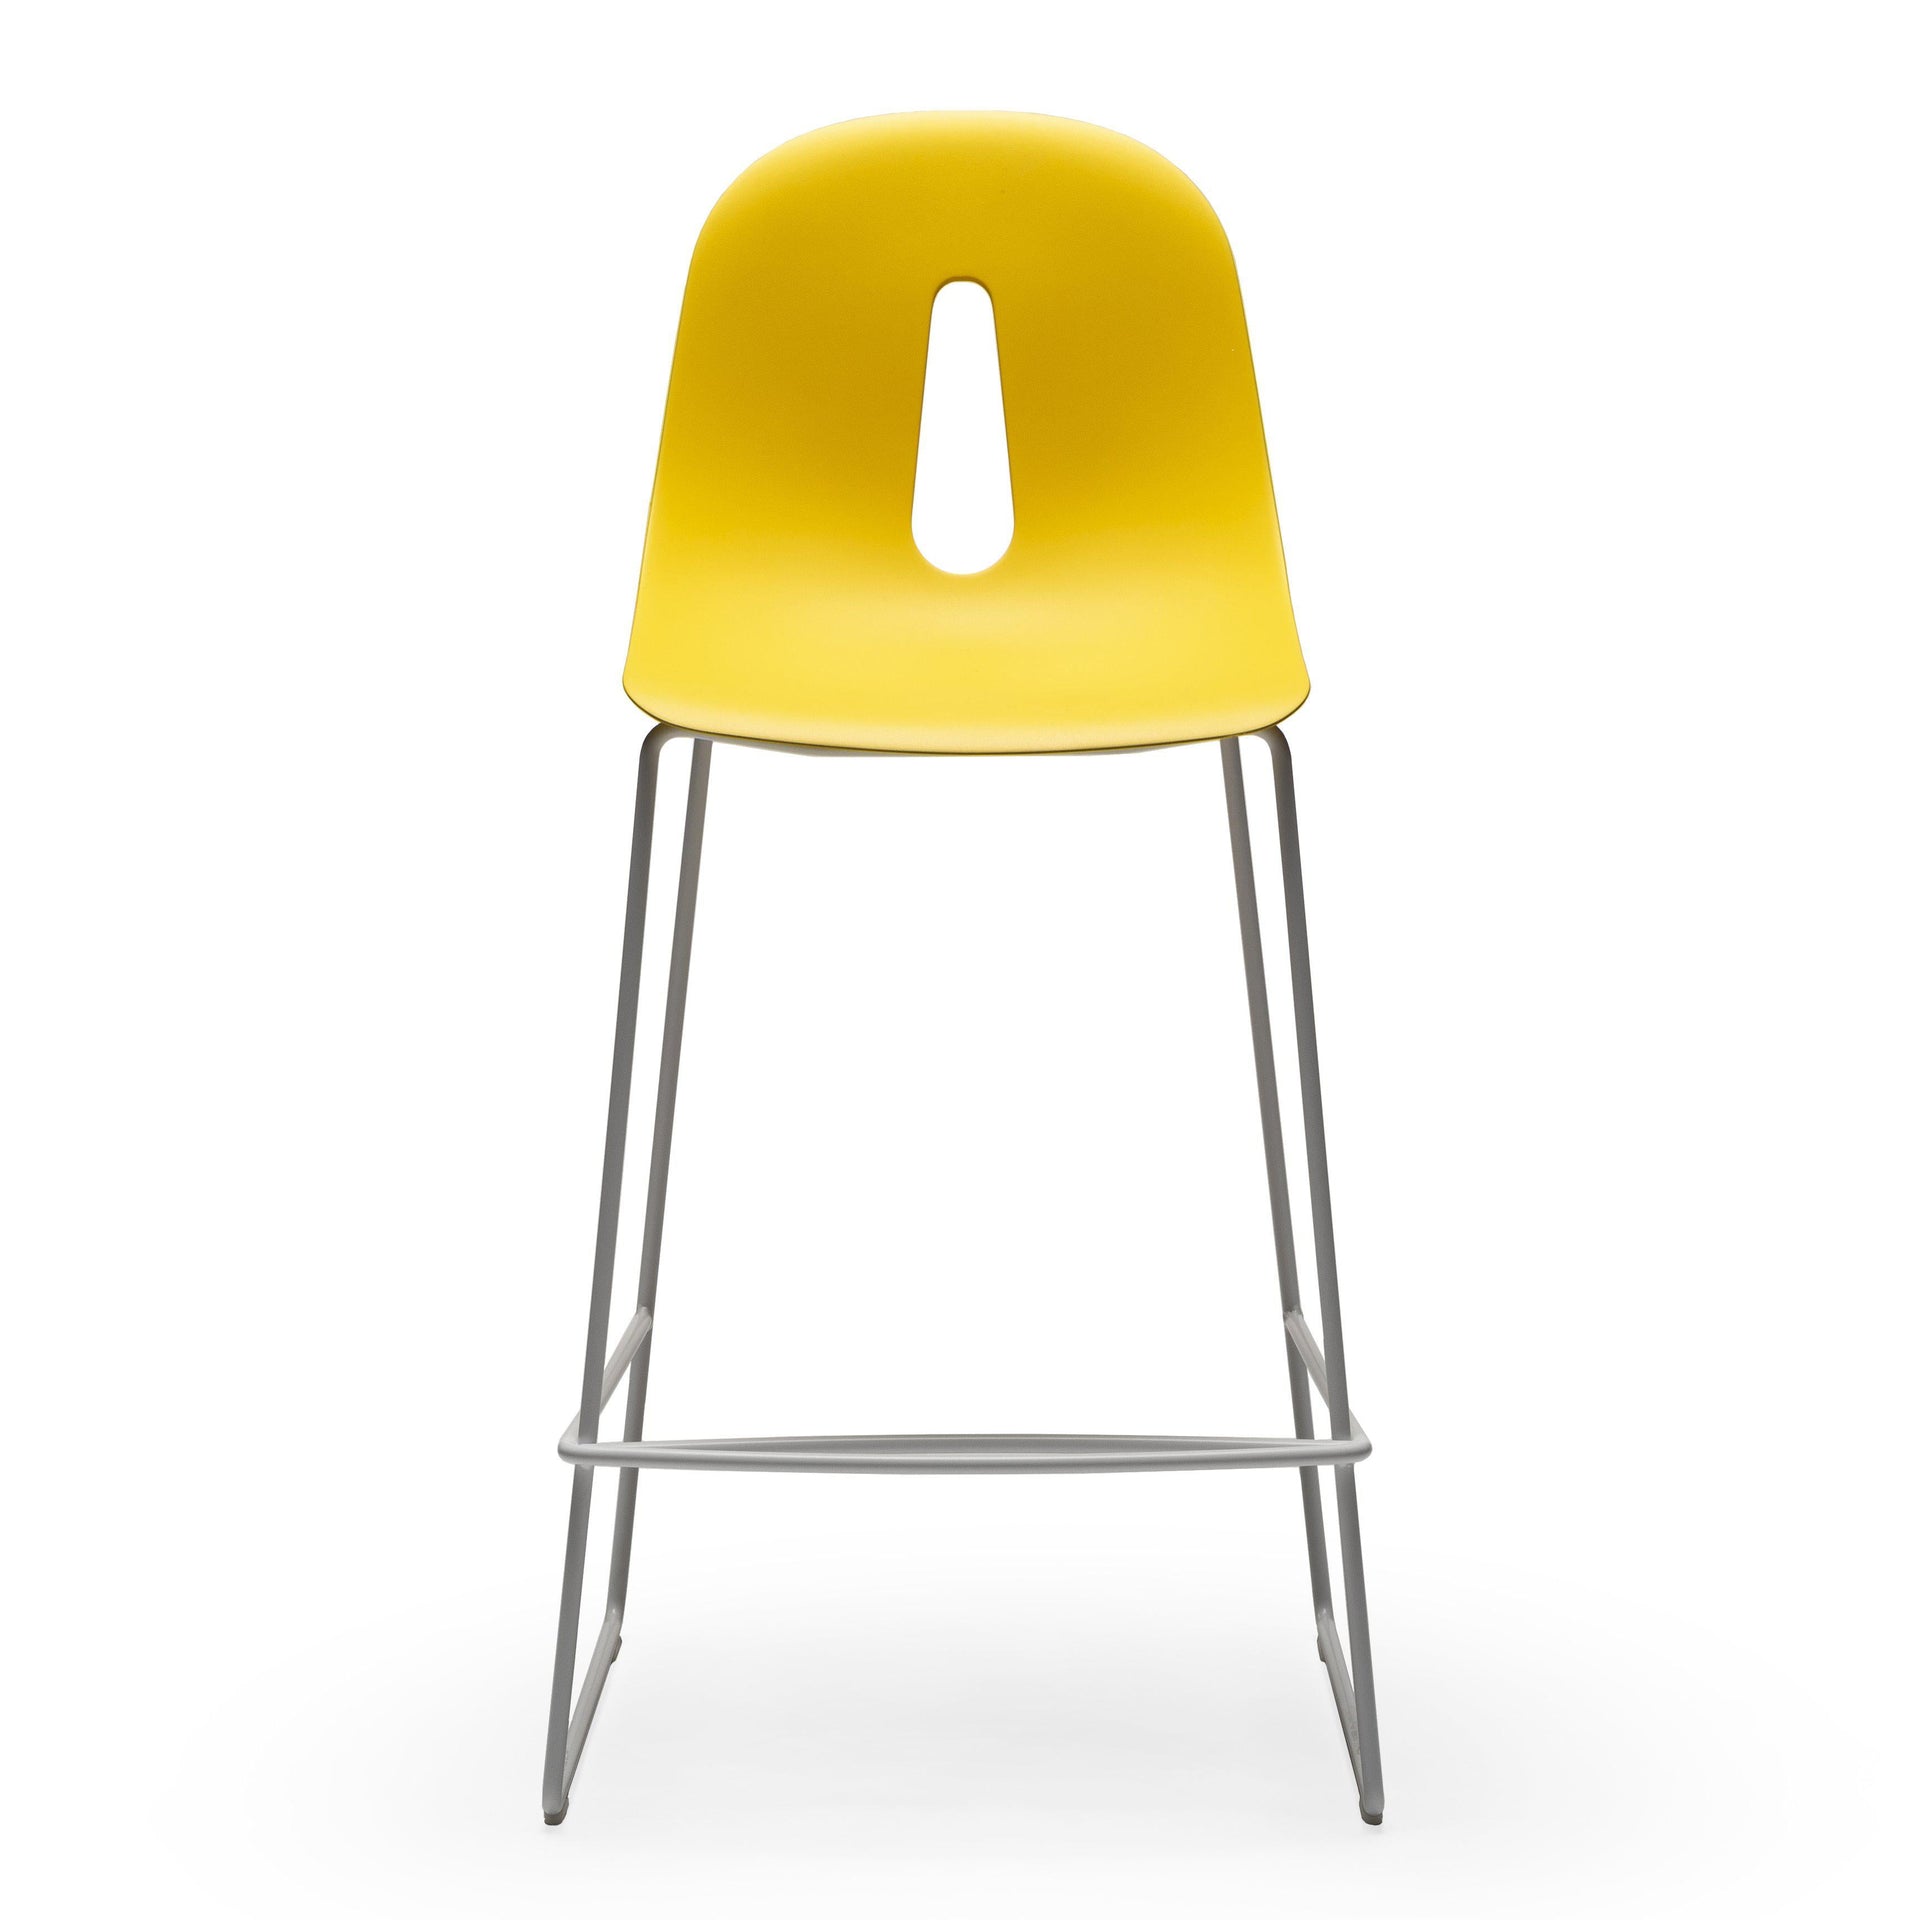 Gotham SL SG 80-High Stool (without arms)-Chairs & More